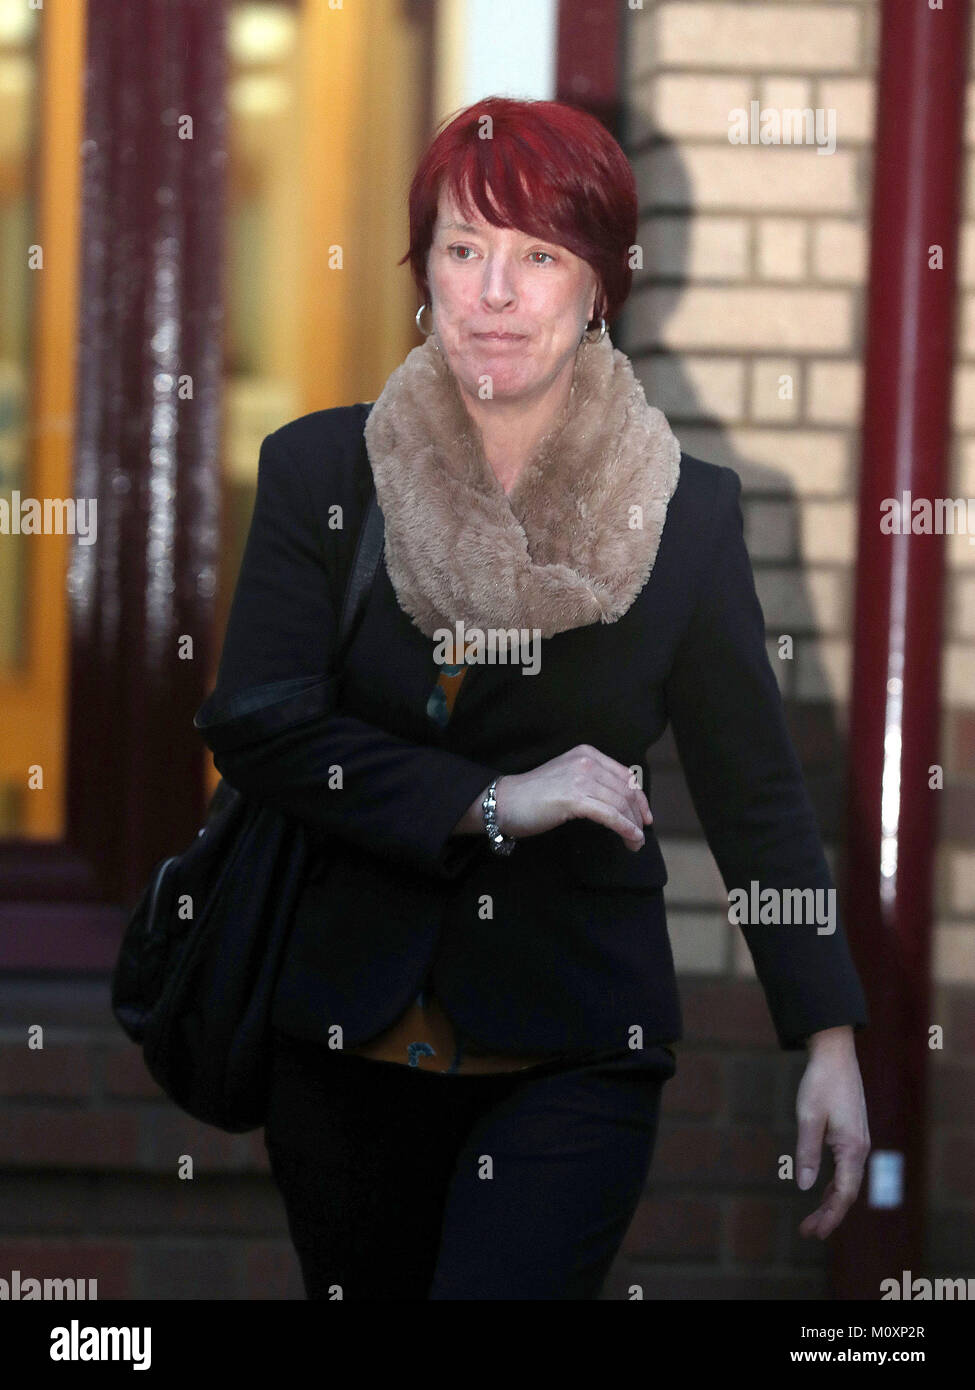 Tracy Lewis the sister of Sean Benton leaves Woking Coroner's Court after giving evidence on the first day of the inquest into the 1995 death of Private Benton at Deepcut army barracks. Stock Photo